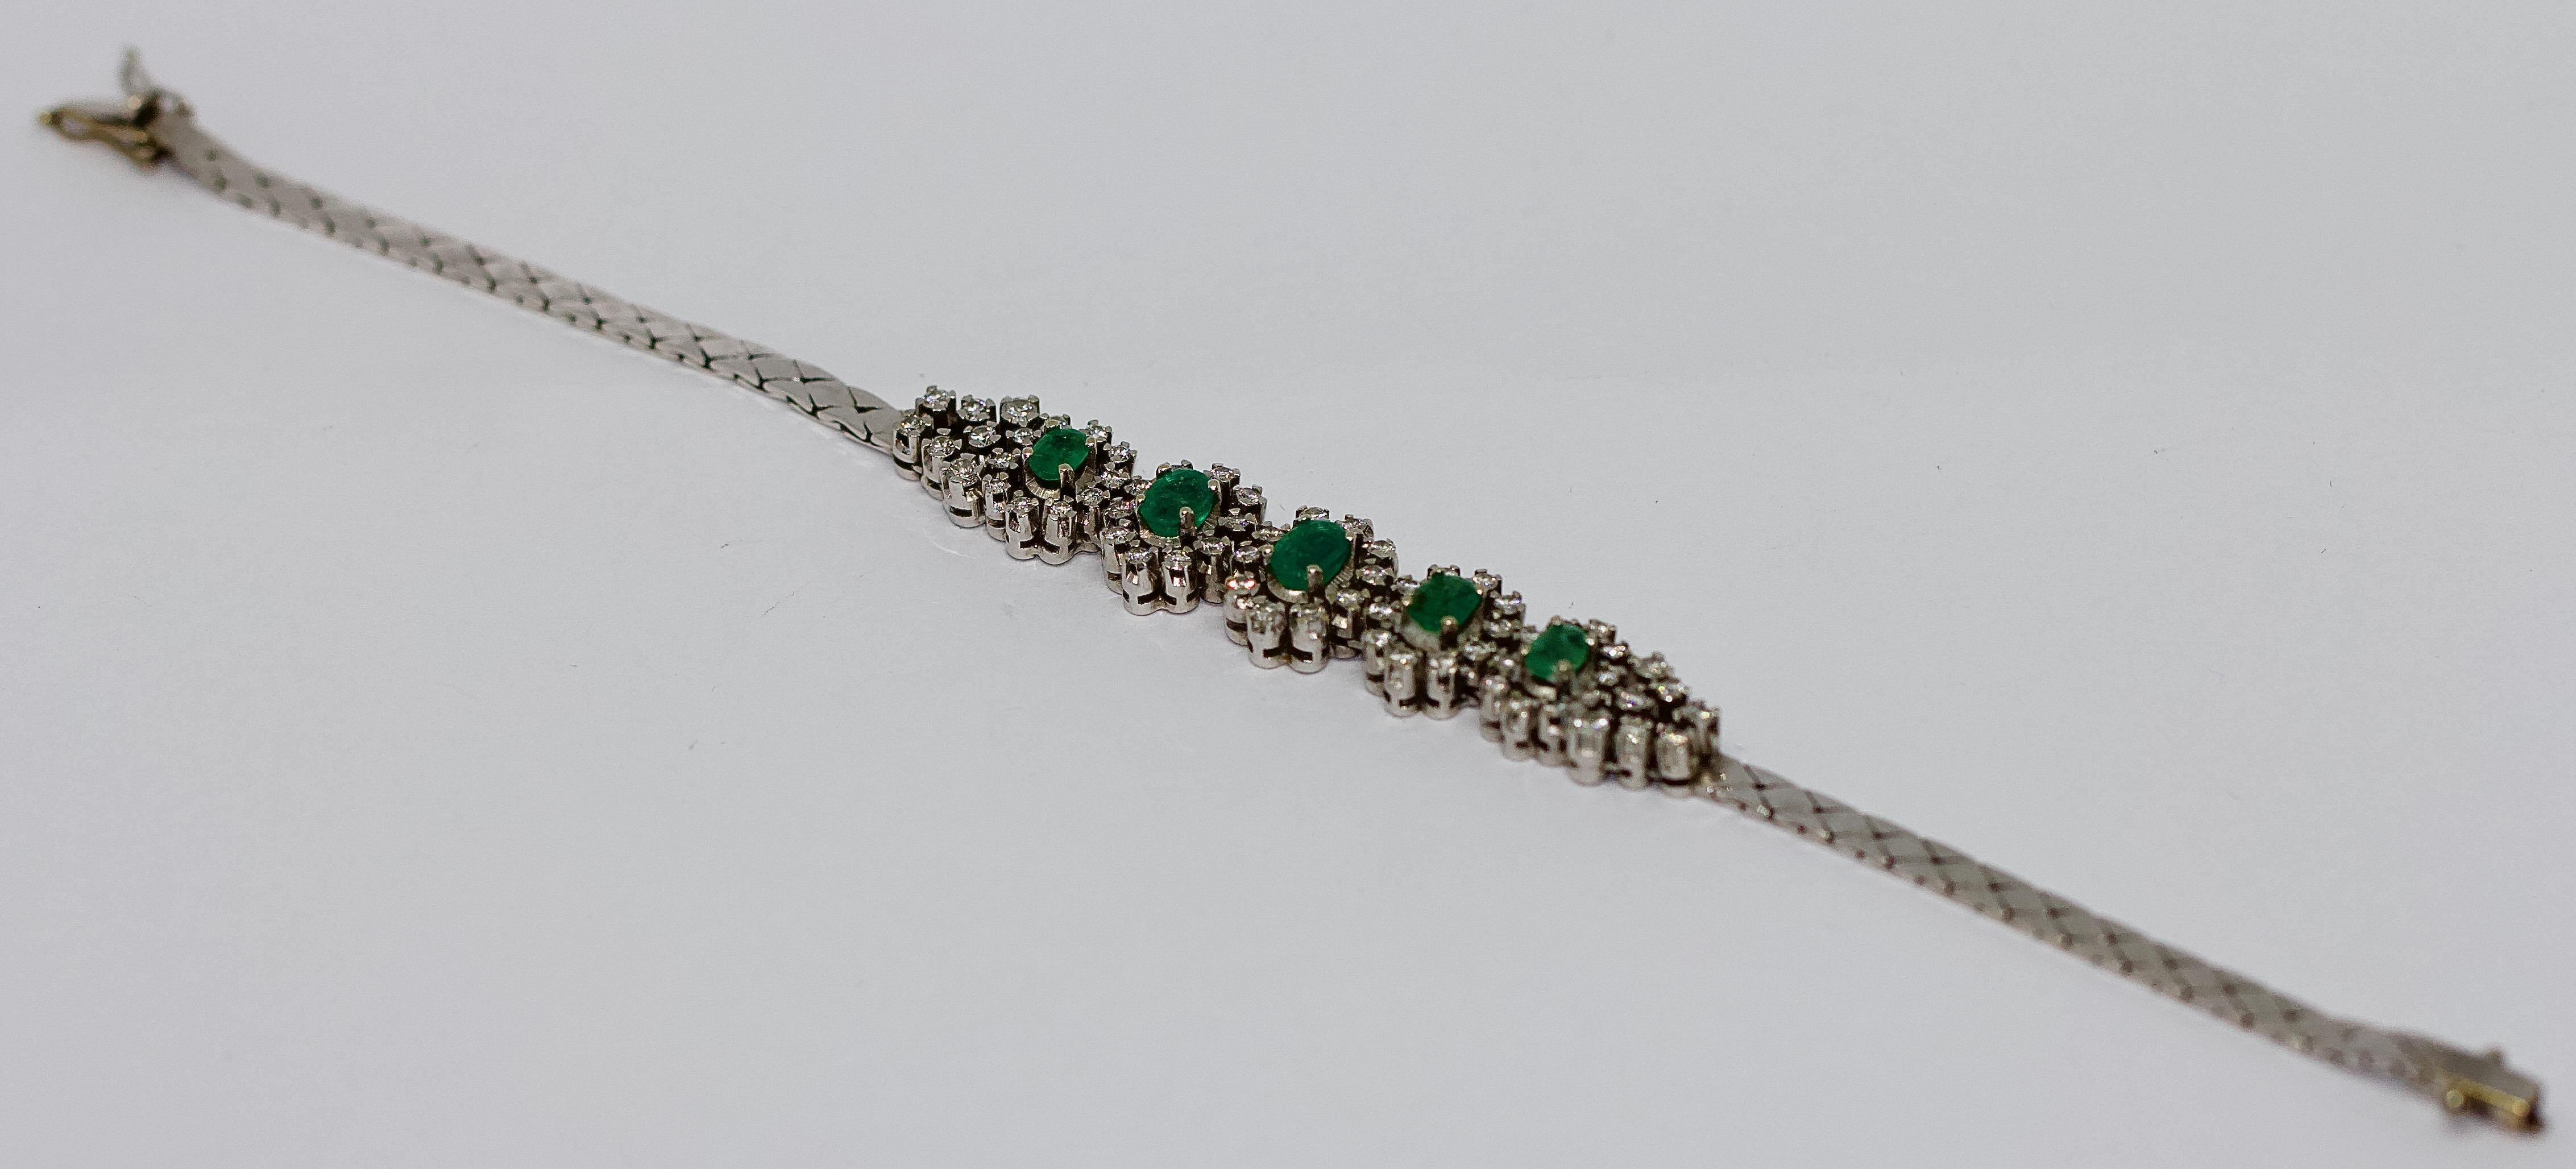 14K White Gold (Tennis) Bracelet with Emeralds and Diamonds.

Including certificate of authenticity.